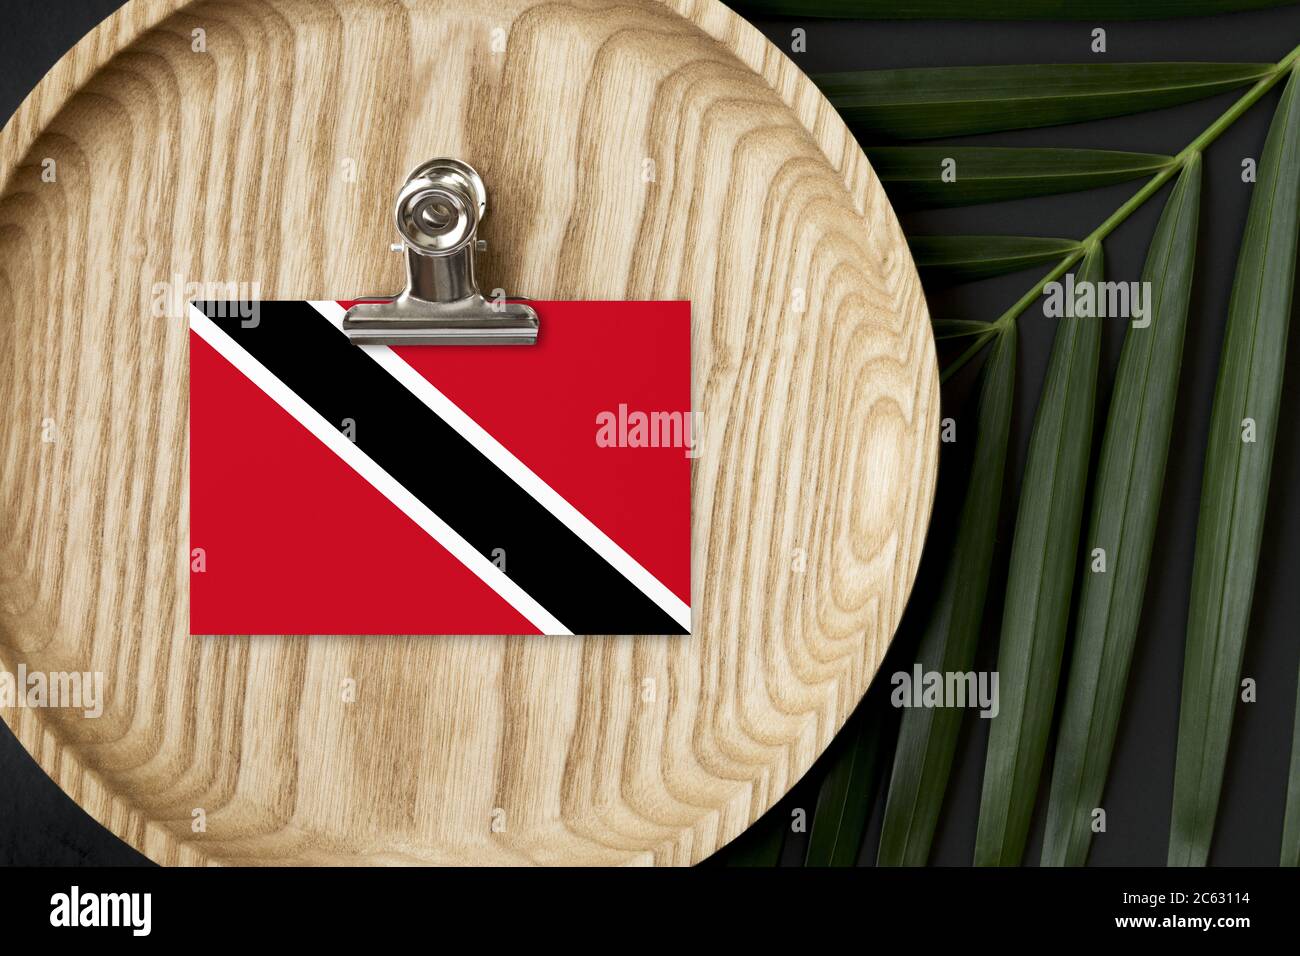 Trinidad And Tobago flag tagged on wooden plate. Tropical palm leaves monstera on background. Minimal national concept. Stock Photo